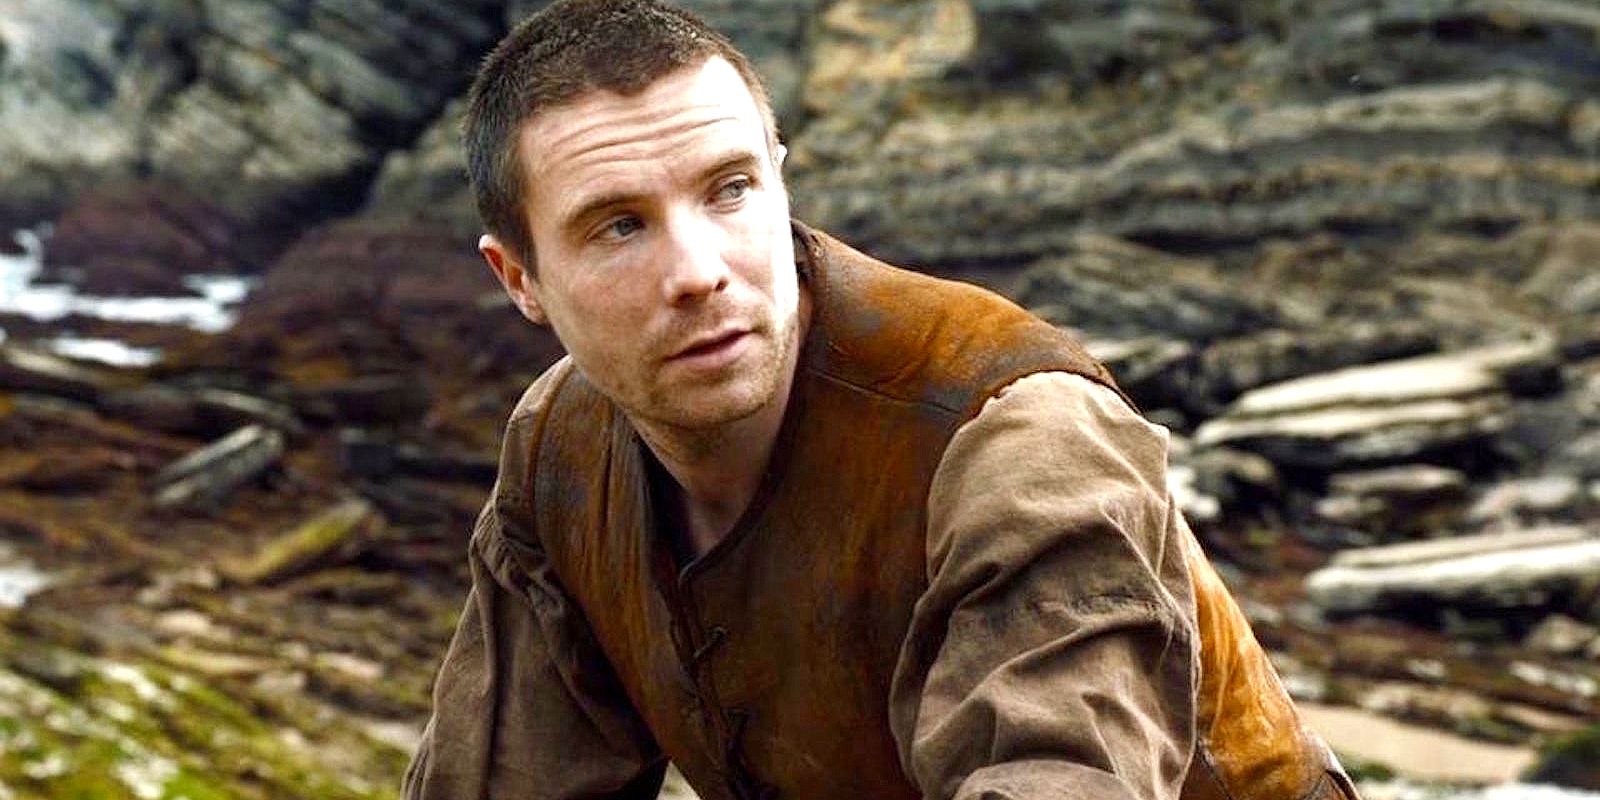 Gendry kneeling by the river in Game of Thrones